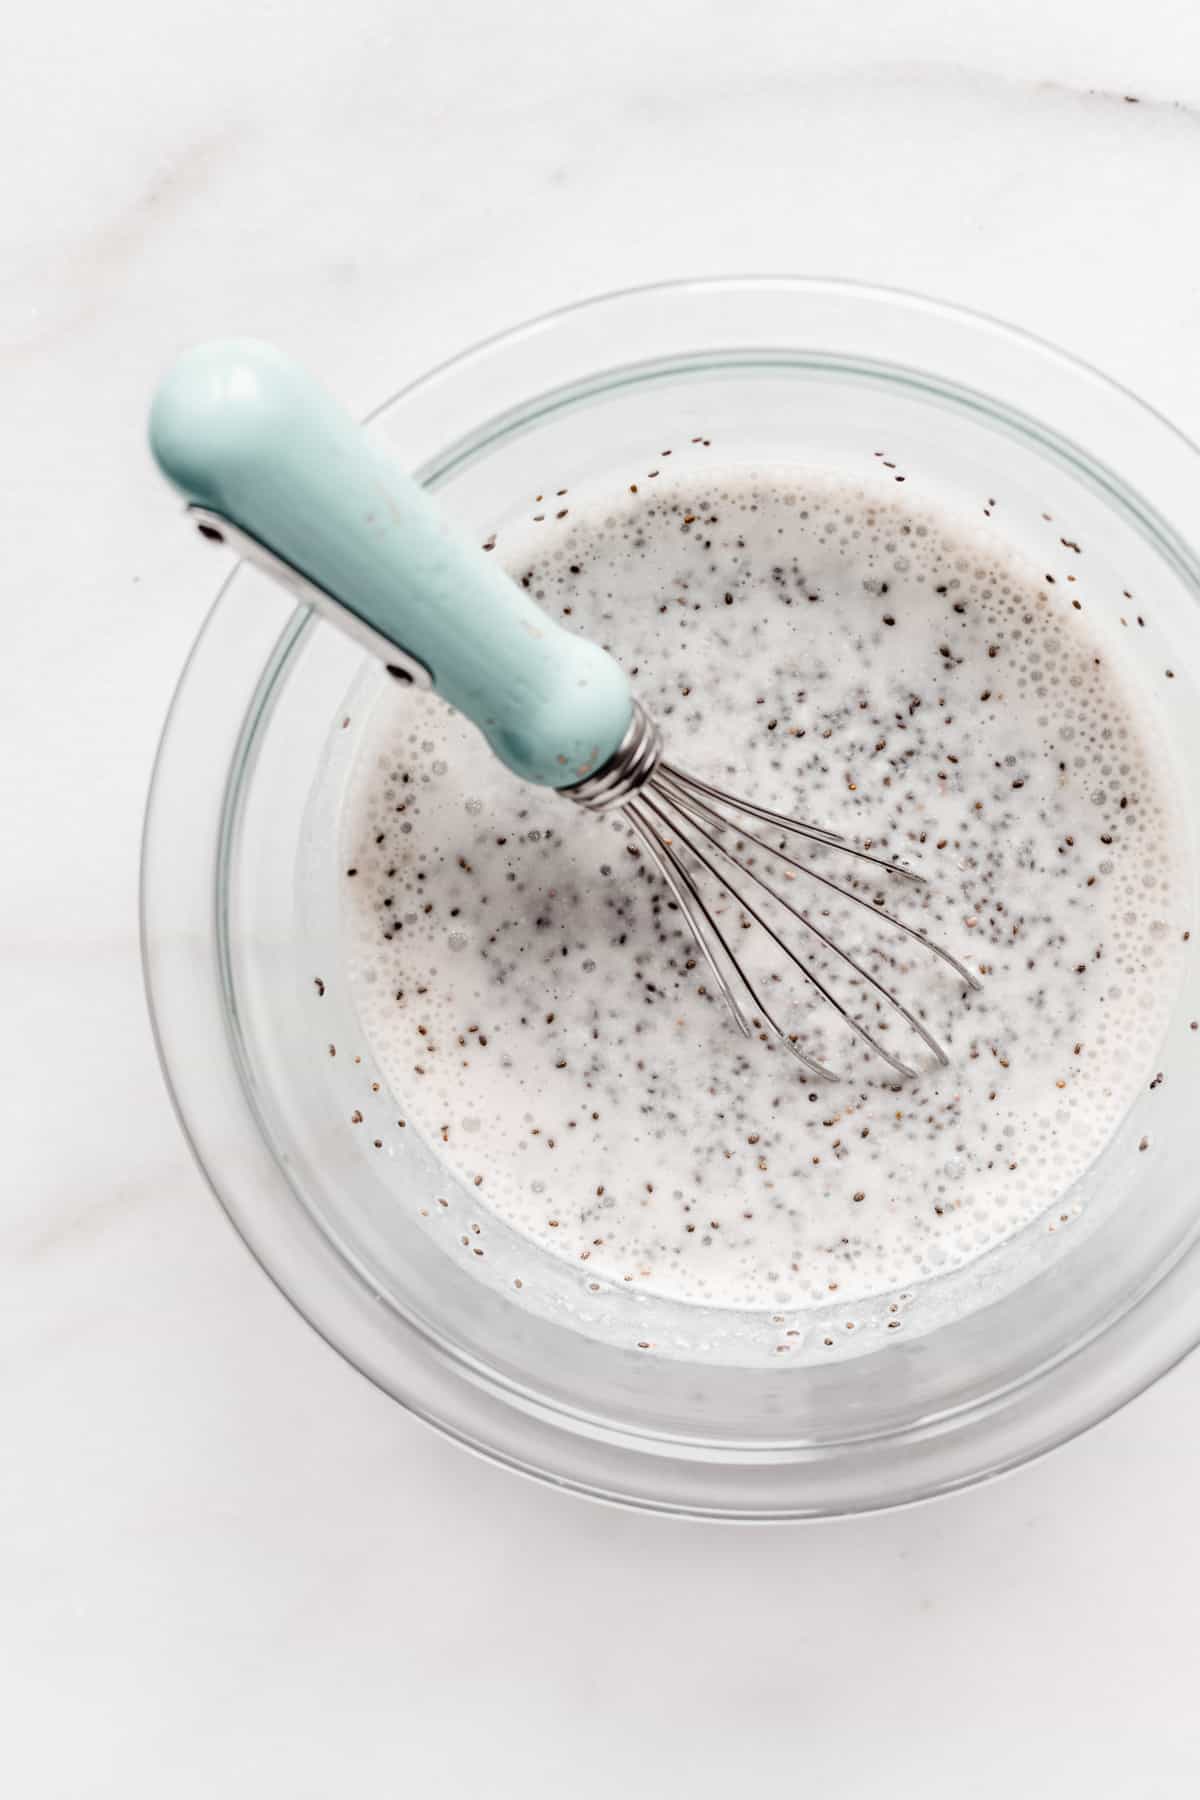 chia seeds and almond milk in a mixing bowl with a blue whisk